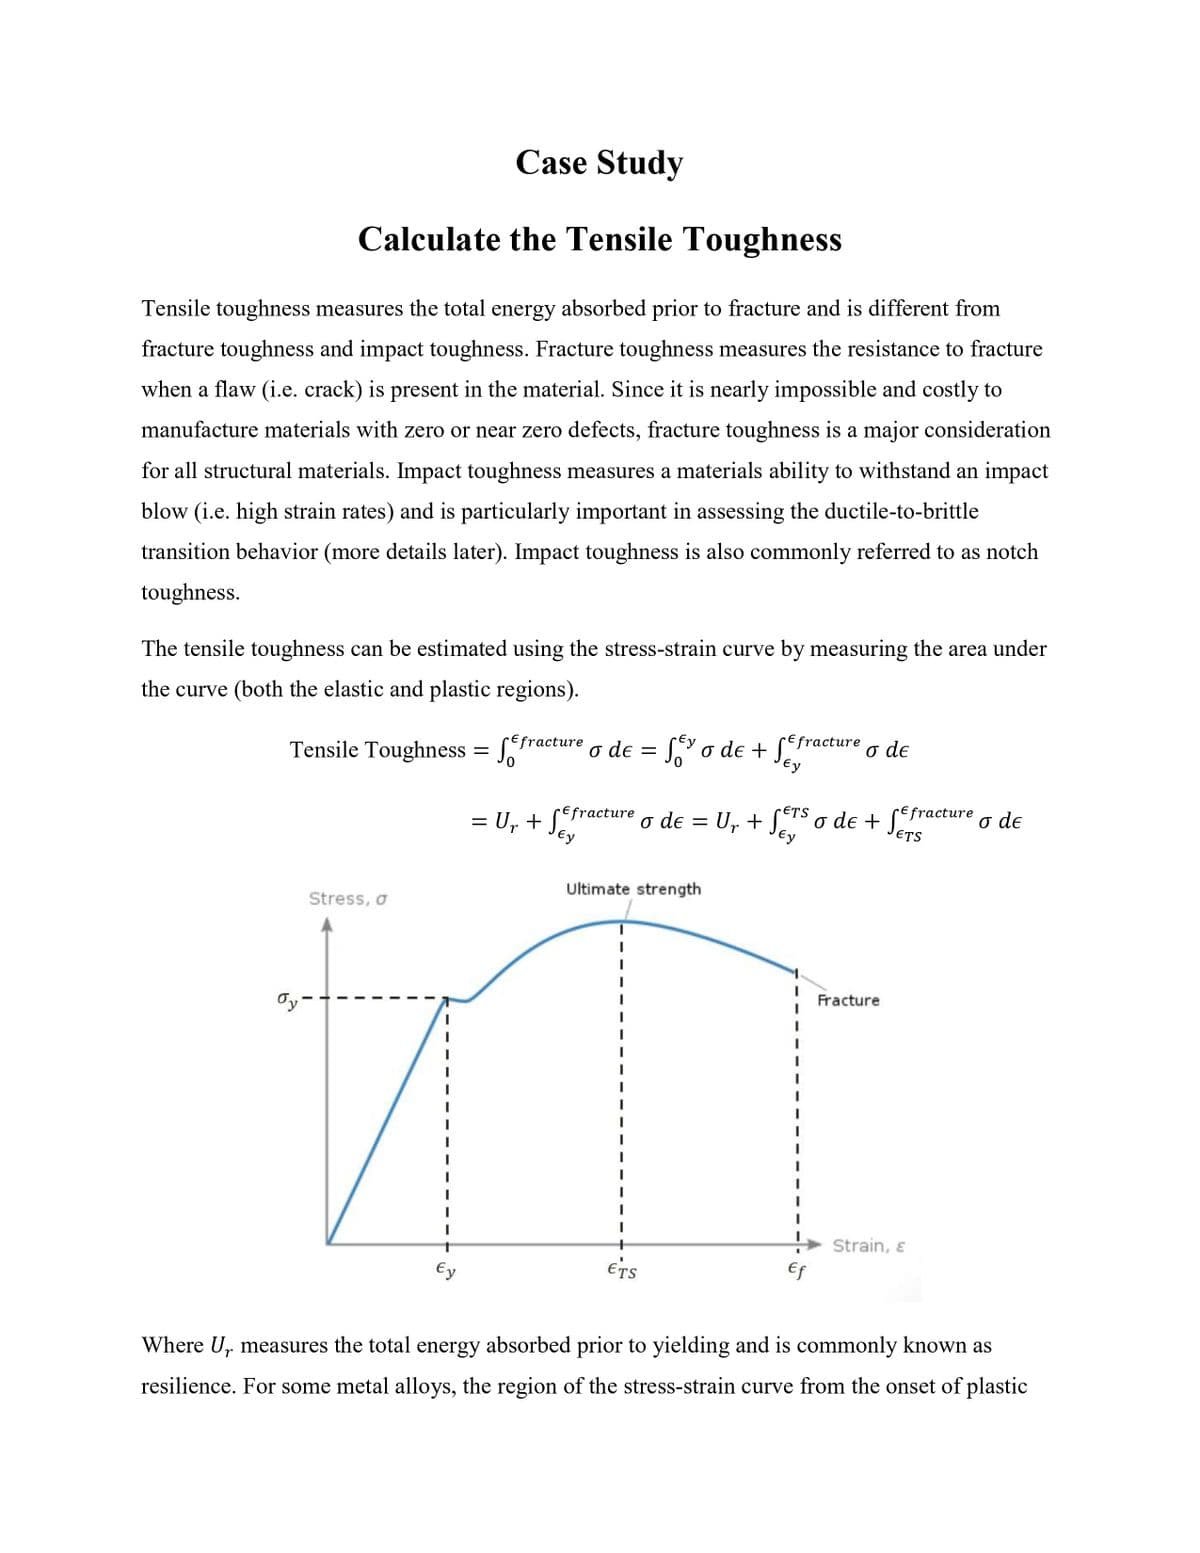 Case Study
Calculate the Tensile Toughness
Tensile toughness measures the total energy absorbed prior to fracture and is different from
fracture toughness and impact toughness. Fracture toughness measures the resistance to fracture
when a flaw (i.e. crack) is present in the material. Since it is nearly impossible and costly to
manufacture materials with zero or near zero defects, fracture toughness is a major consideration
for all structural materials. Impact toughness measures a materials ability to withstand an impact
blow (i.e. high strain rates) and is particularly important in assessing the ductile-to-brittle
transition behavior (more details later). Impact toughness is also commonly referred to as notch
toughness.
The tensile toughness can be estimated using the stress-strain curve by measuring the area under
the curve (both the elastic and plastic regions).
Tensile Toughness = f
Stress, σ
Ty-
Ey
Efracture
ETS
Ur
Ey
Efracture o de = U₁ + SETS o de + Sefracture o de
Ey
Ey
o de = Ser o de + Ser
= U₁ + Sey
Ur
Ey
Ultimate strength
ETS
Efracture
I
I
Ef
o de
Fracture
Strain, &
r
Where U measures the total energy absorbed prior to yielding and is commonly known as
resilience. For some metal alloys, the region of the stress-strain curve from the onset of plastic